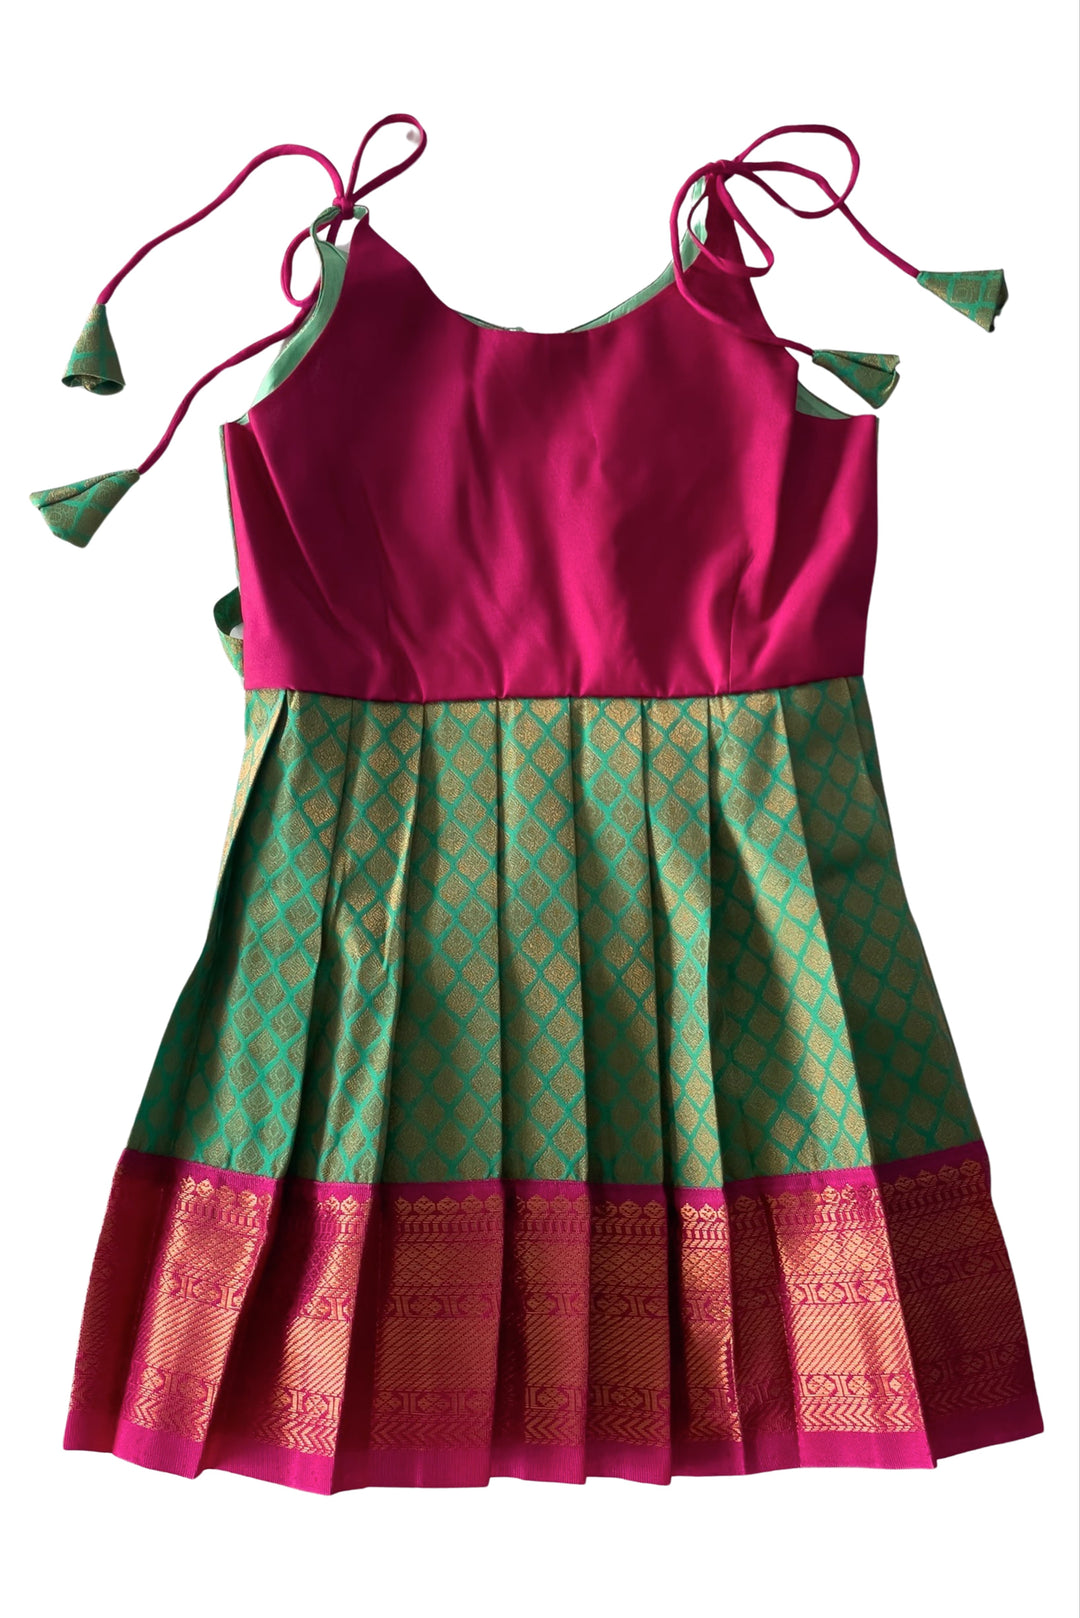 The Nesavu Tie-up Frock Chic Magenta and Green Tie-Up Silk Frock for Girls - Traditional Elegance Nesavu 14 (6M) / Green / Style 5 T304E-14 Girls Magenta & Green Silk Frock | Festive Tie-Up Design | Classic Cultural Attire | The Nesavu